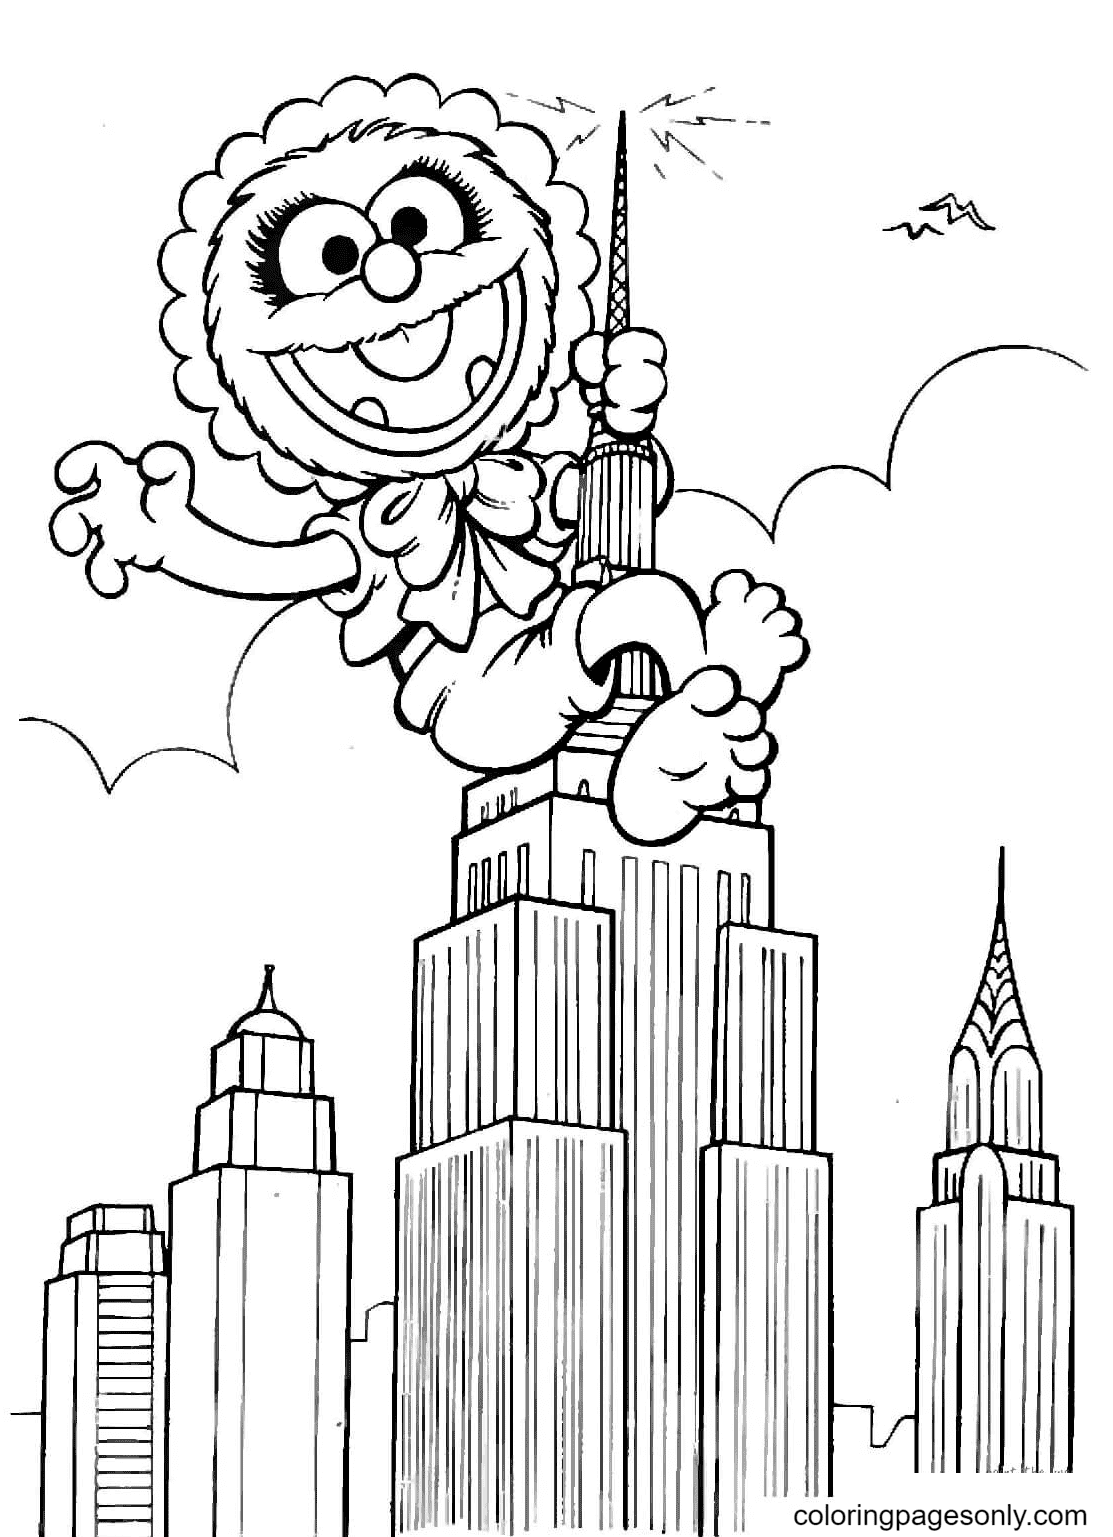 Animal Climbs The Skyscraper Coloring Pages